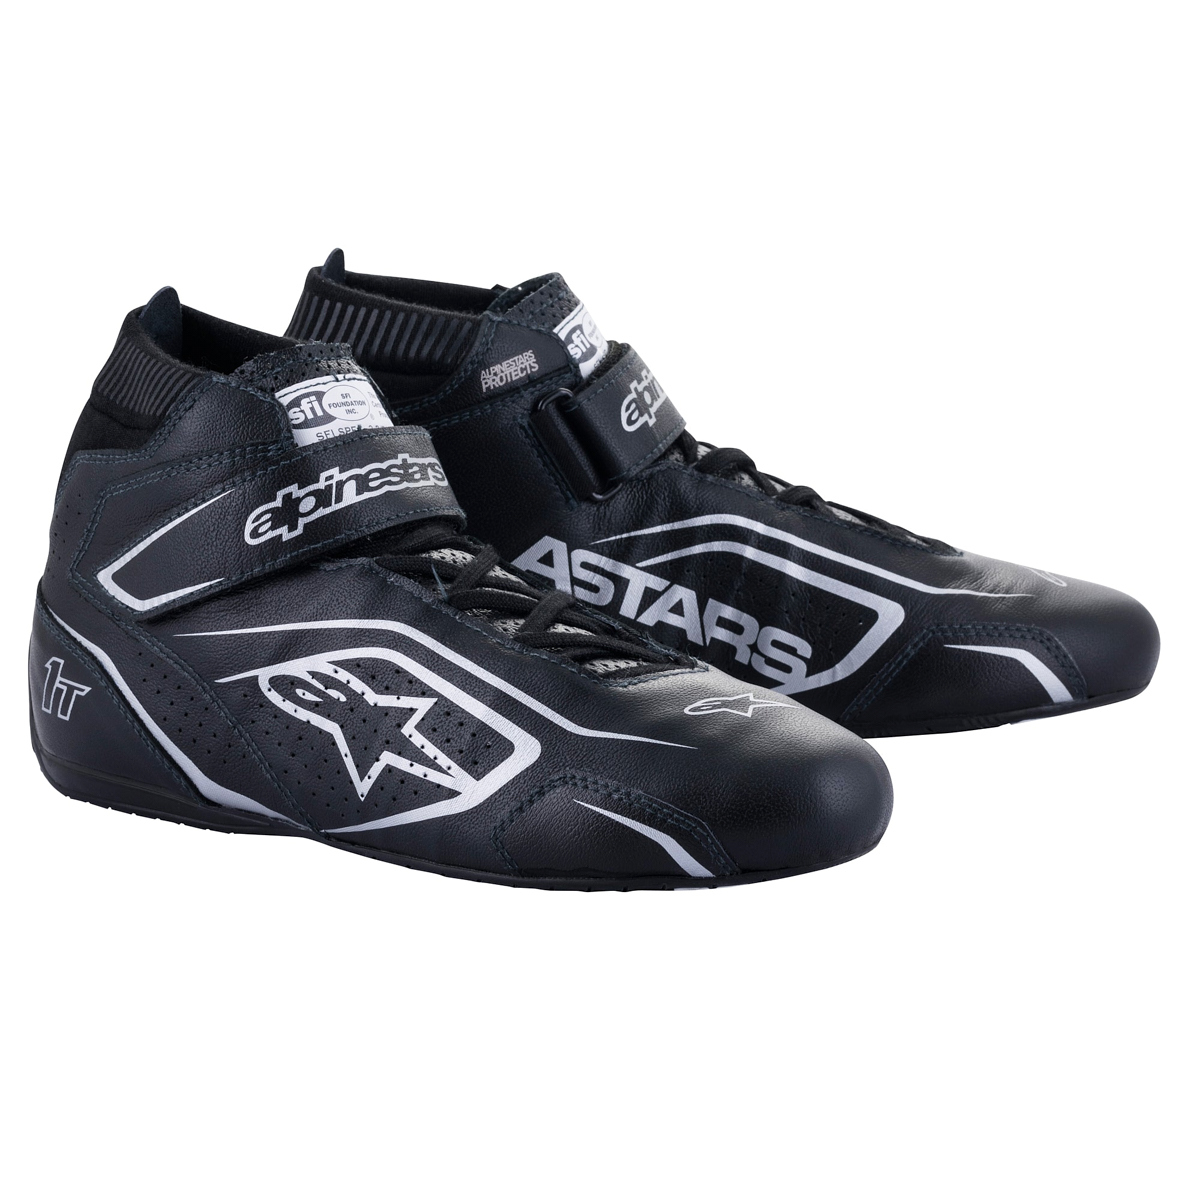 Alpinestars 2710122-119-12 Driving Shoe, Tech 1-T V3, Mid-Top, SFI 3.3, Leather Outer, Nomex Inner, Black / Silver, Size 12, Pair